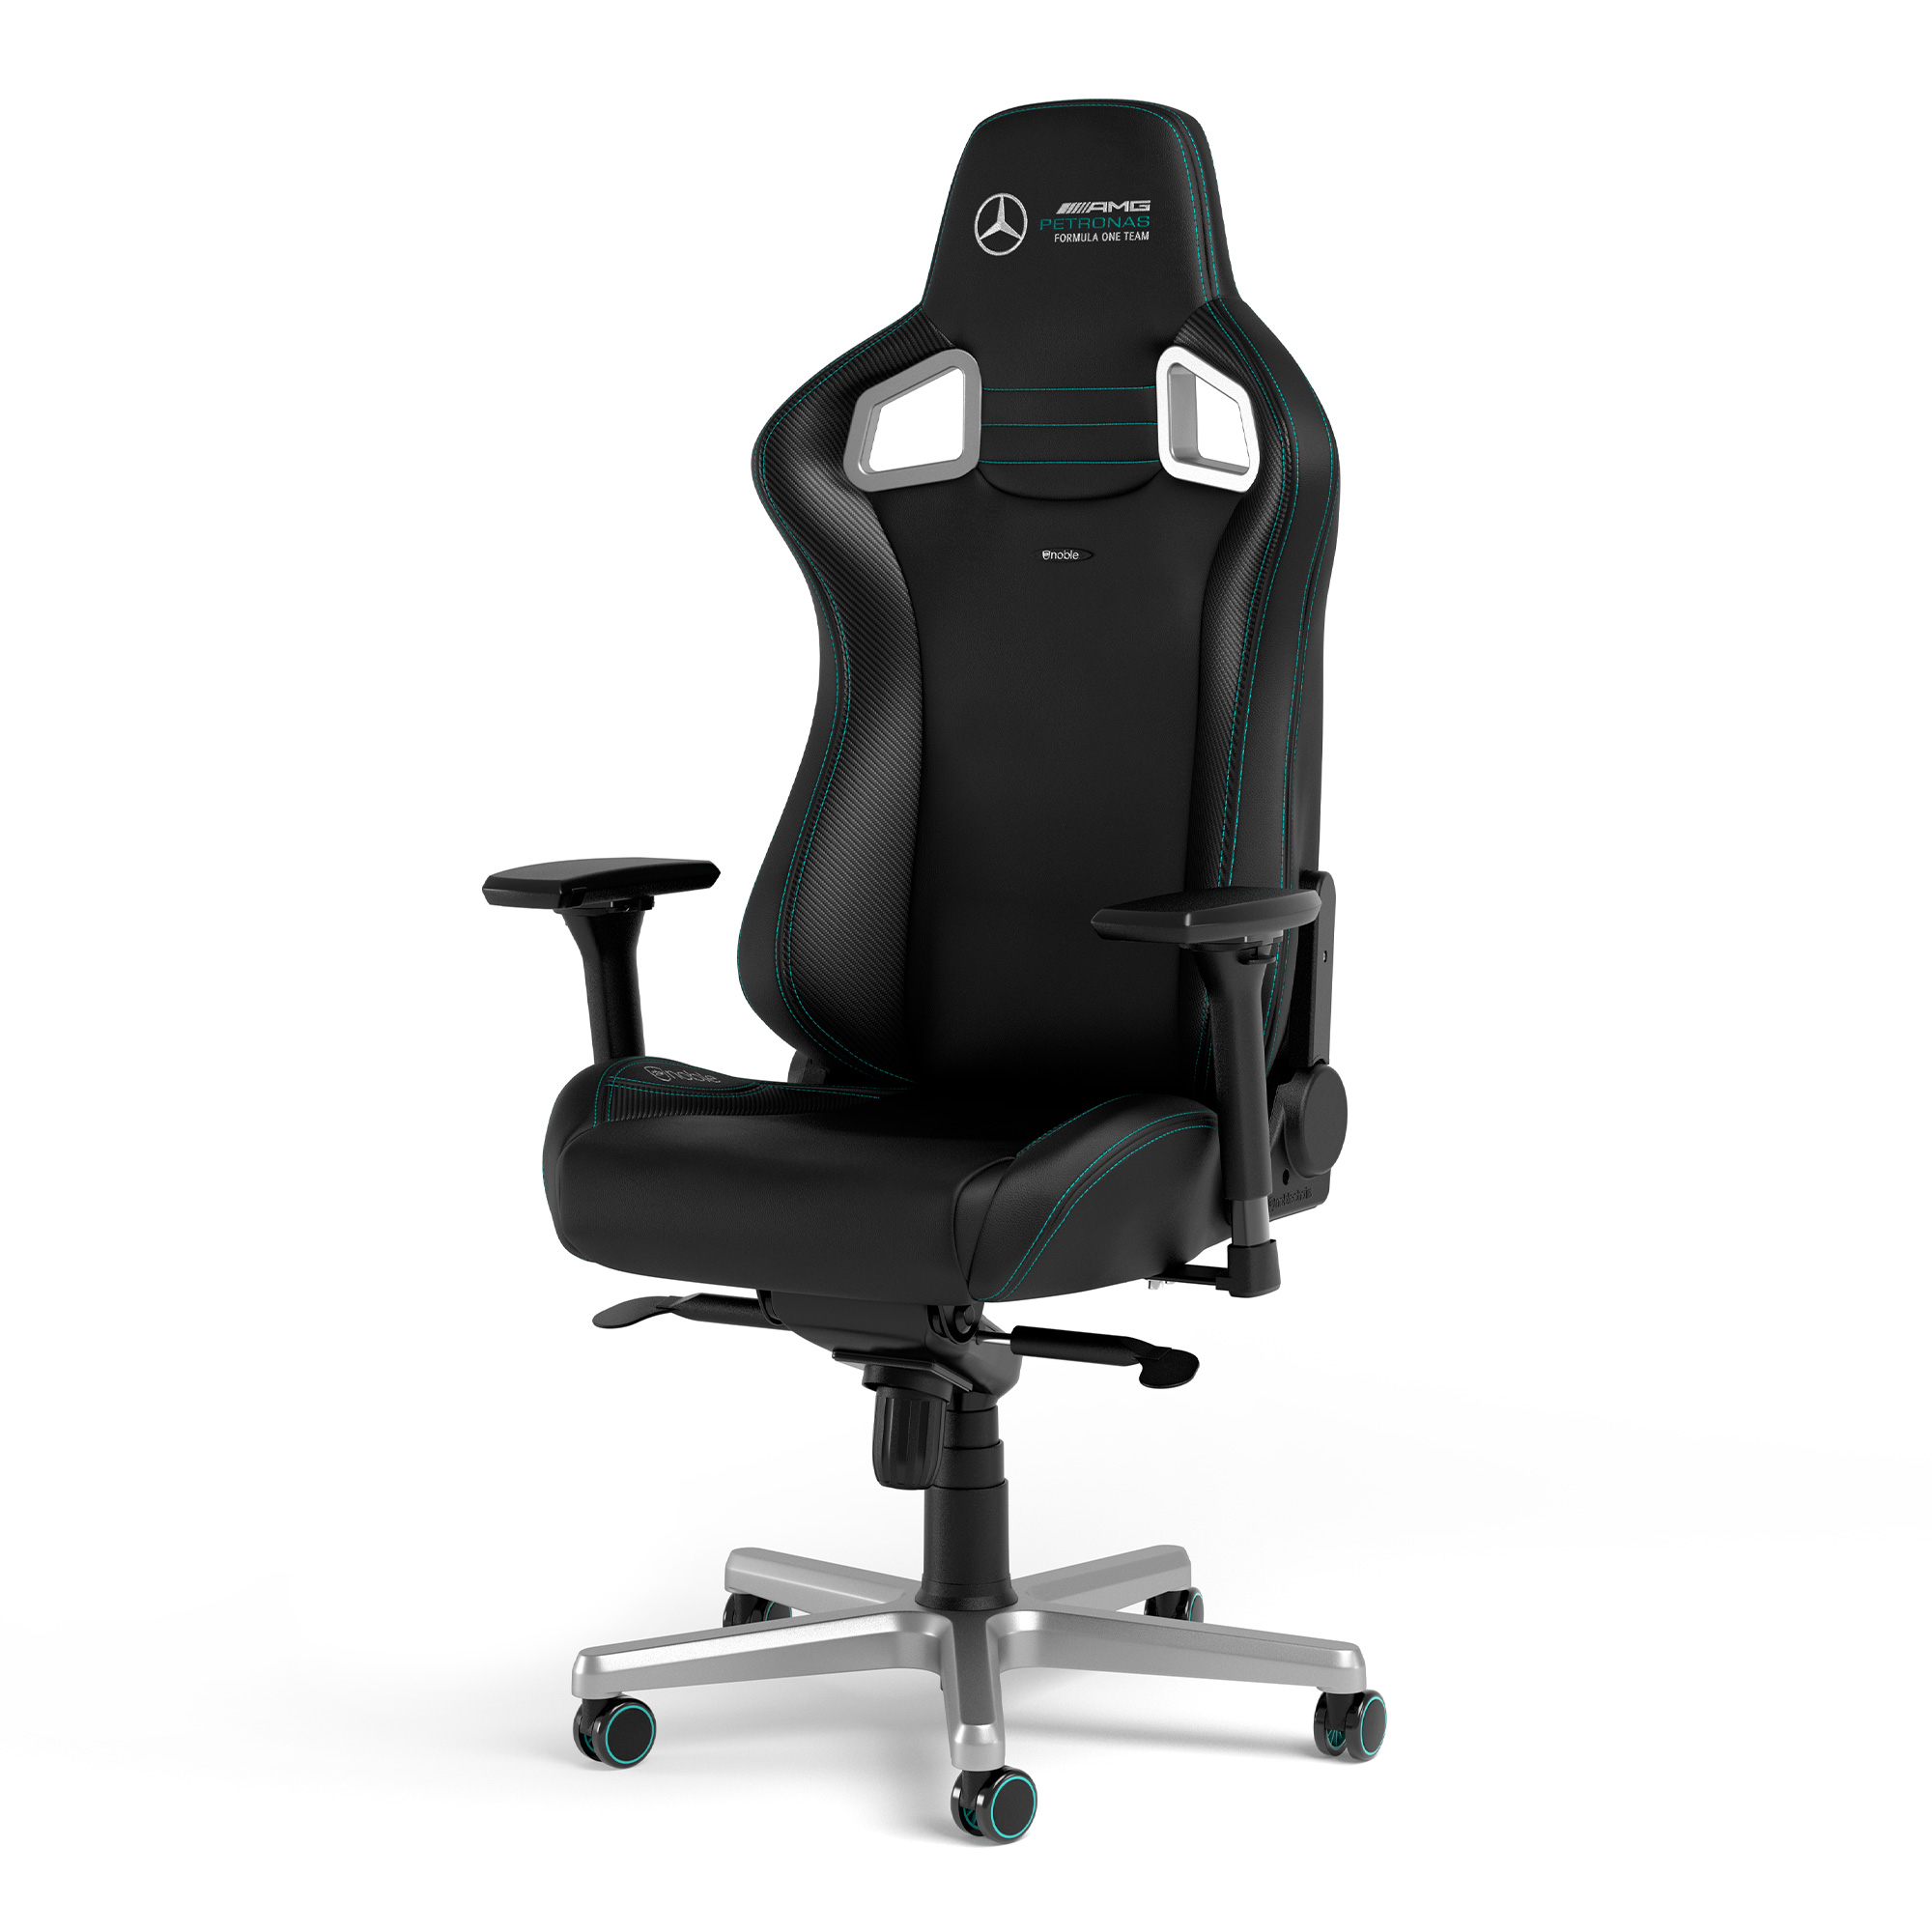 noblechairs - noblechairs EPIC Gaming Chair - Mercedes-AMG Petronas Formula One Team Edition